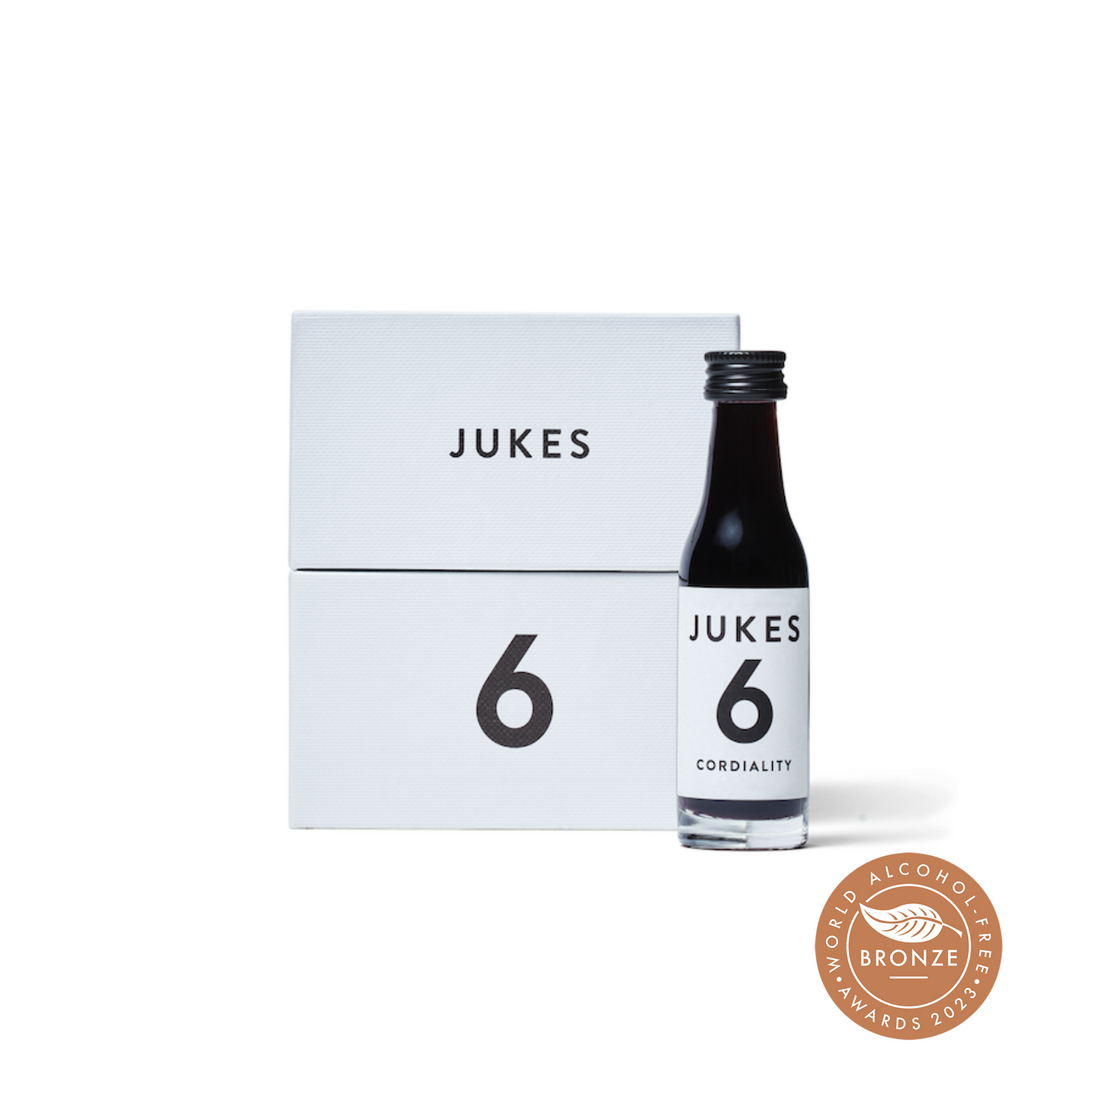 Jukes - 6 - The Dark Red - Non-Alcoholic Cordial - 9 Bottle Box - Boisson — Brooklyn's Non-Alcoholic Spirits, Beer, Wine, and Home Bar Shop in Cobble Hill